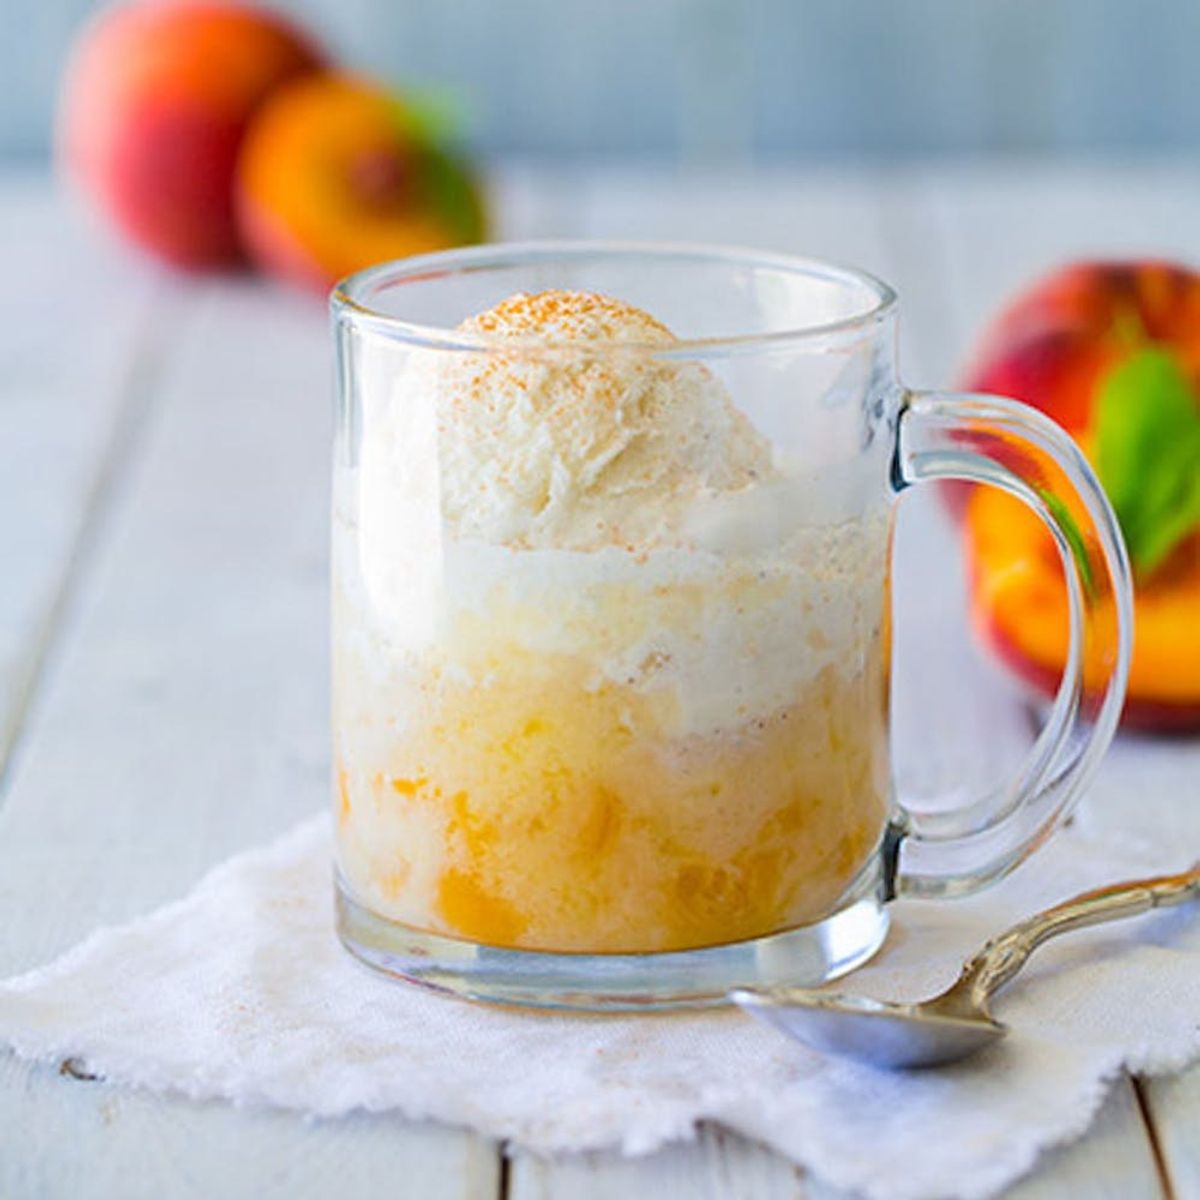 26 Delicious mug recipes worth exploring features this peach cobbler mug cake in a clear mug and silver spoon.